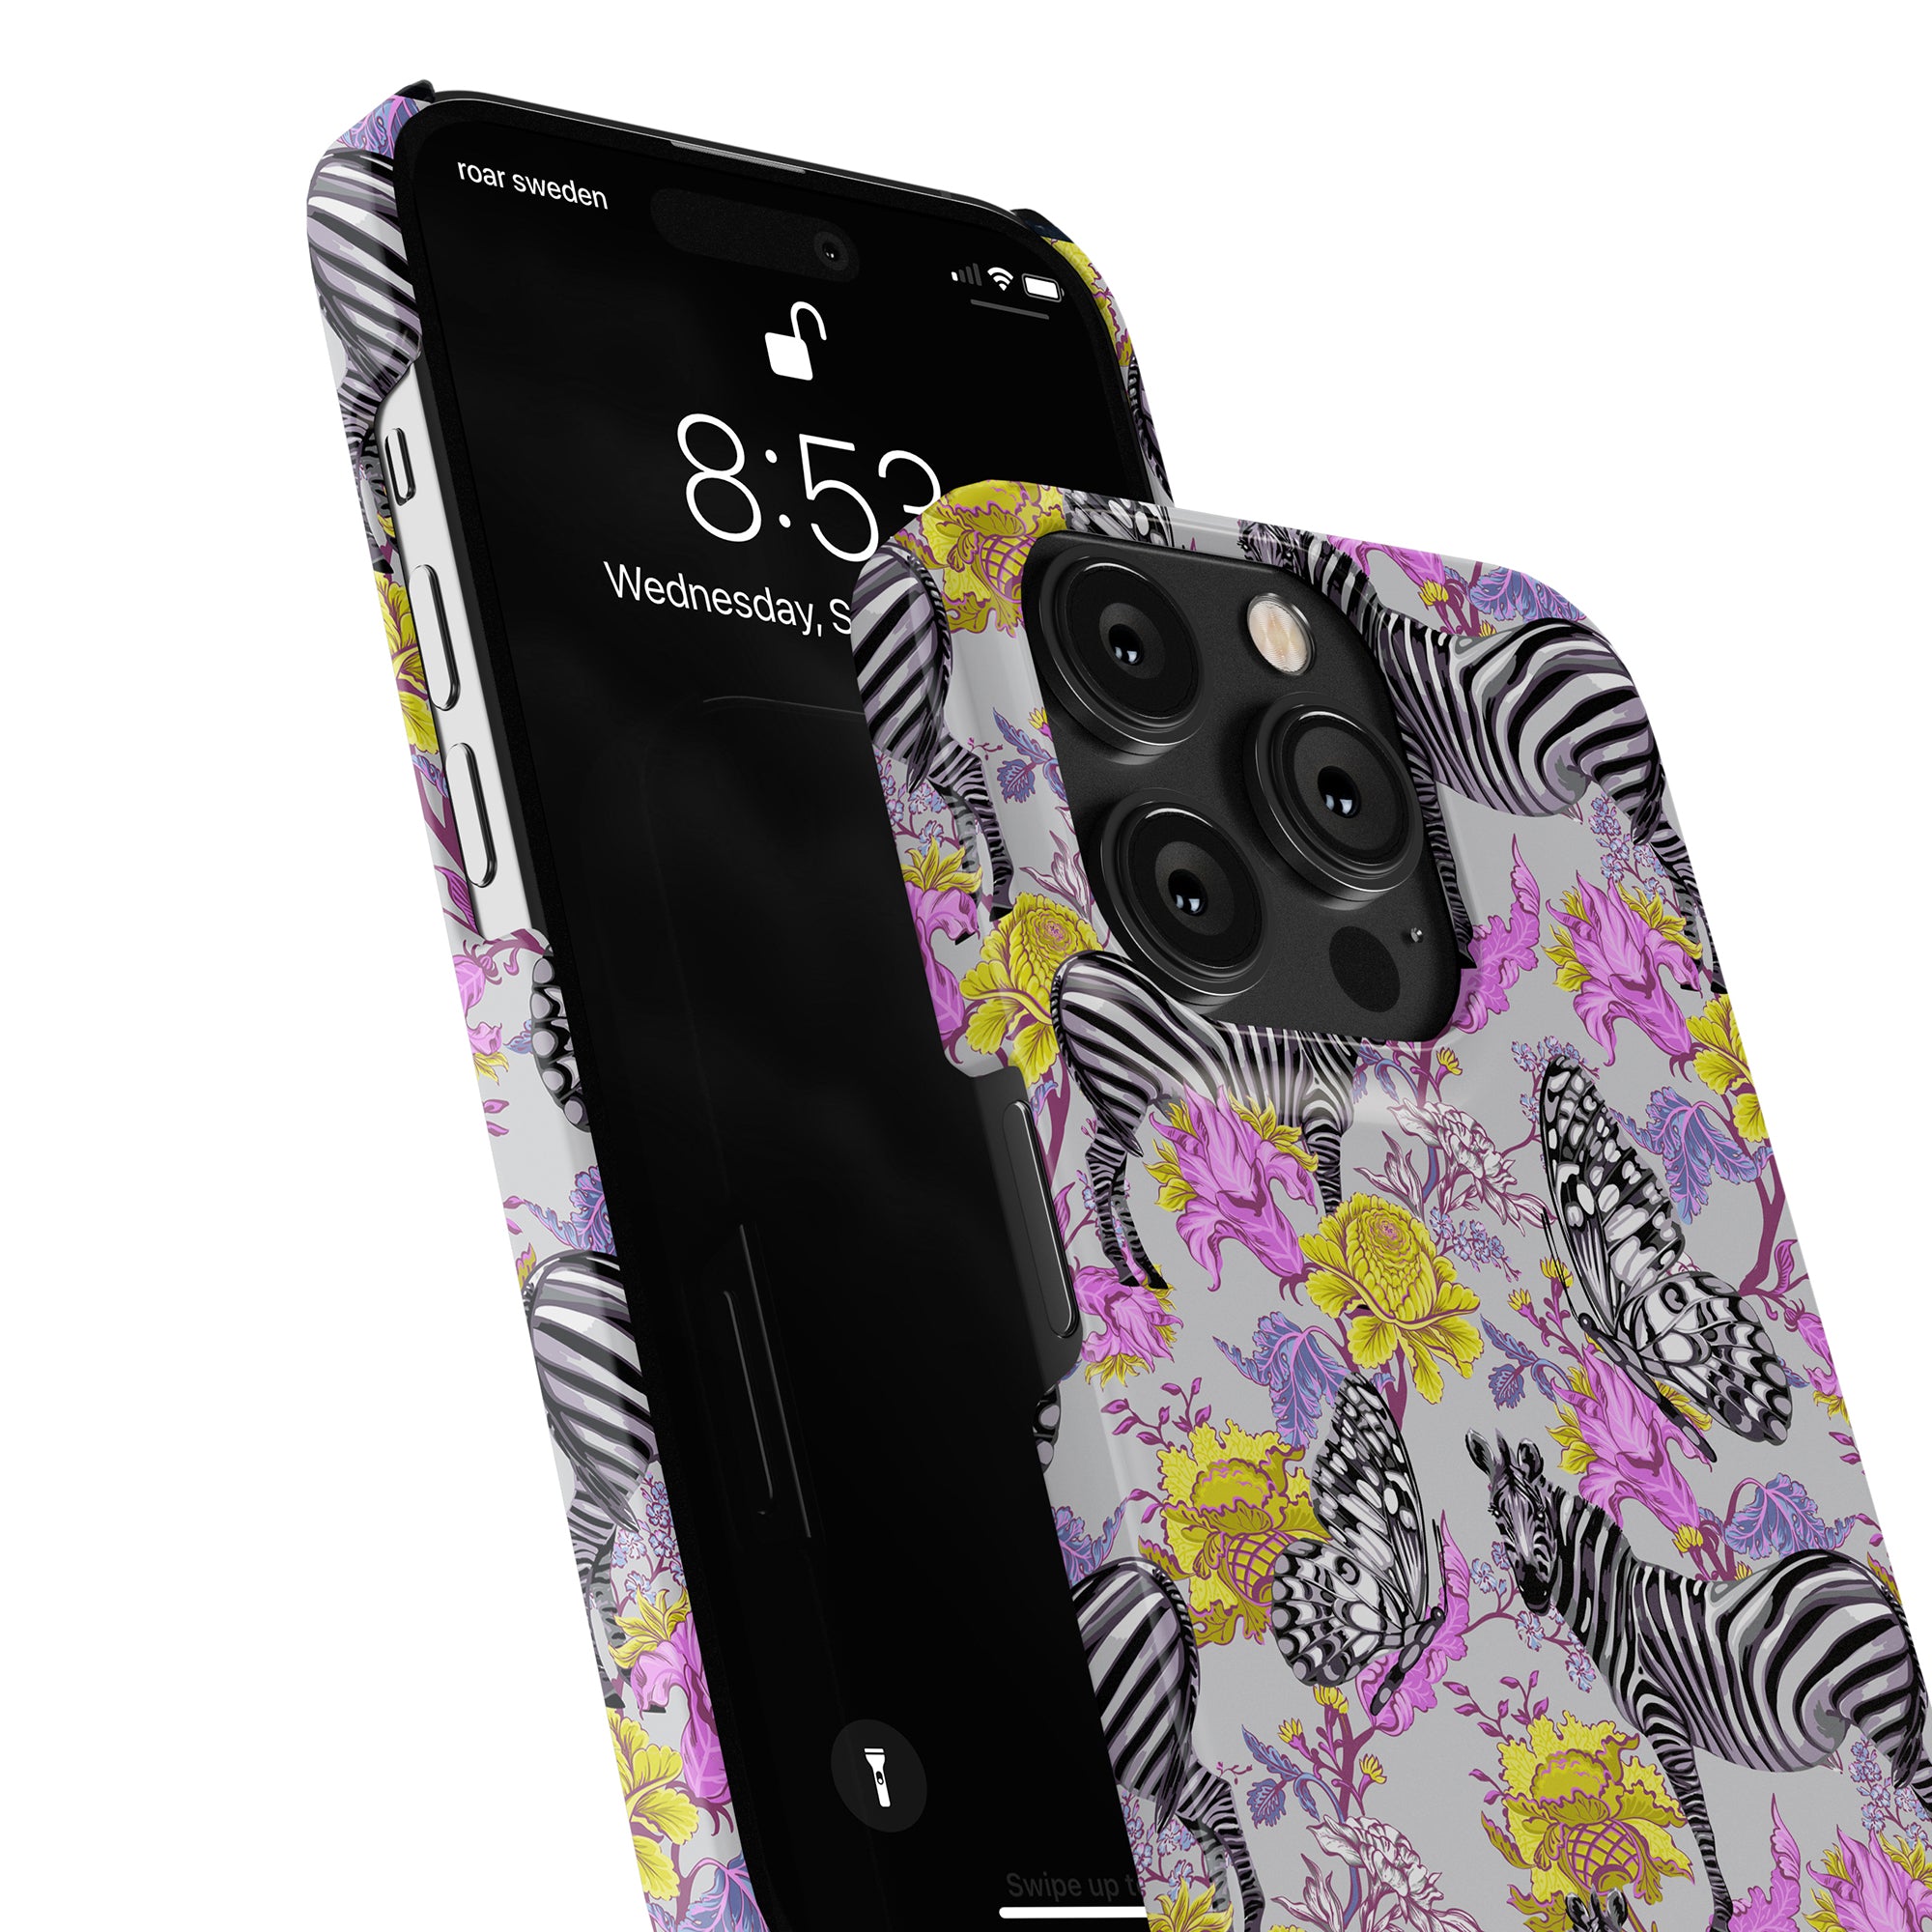 An Exotic Zebra - Slim case, perfect for the iPhone 11 Pro.